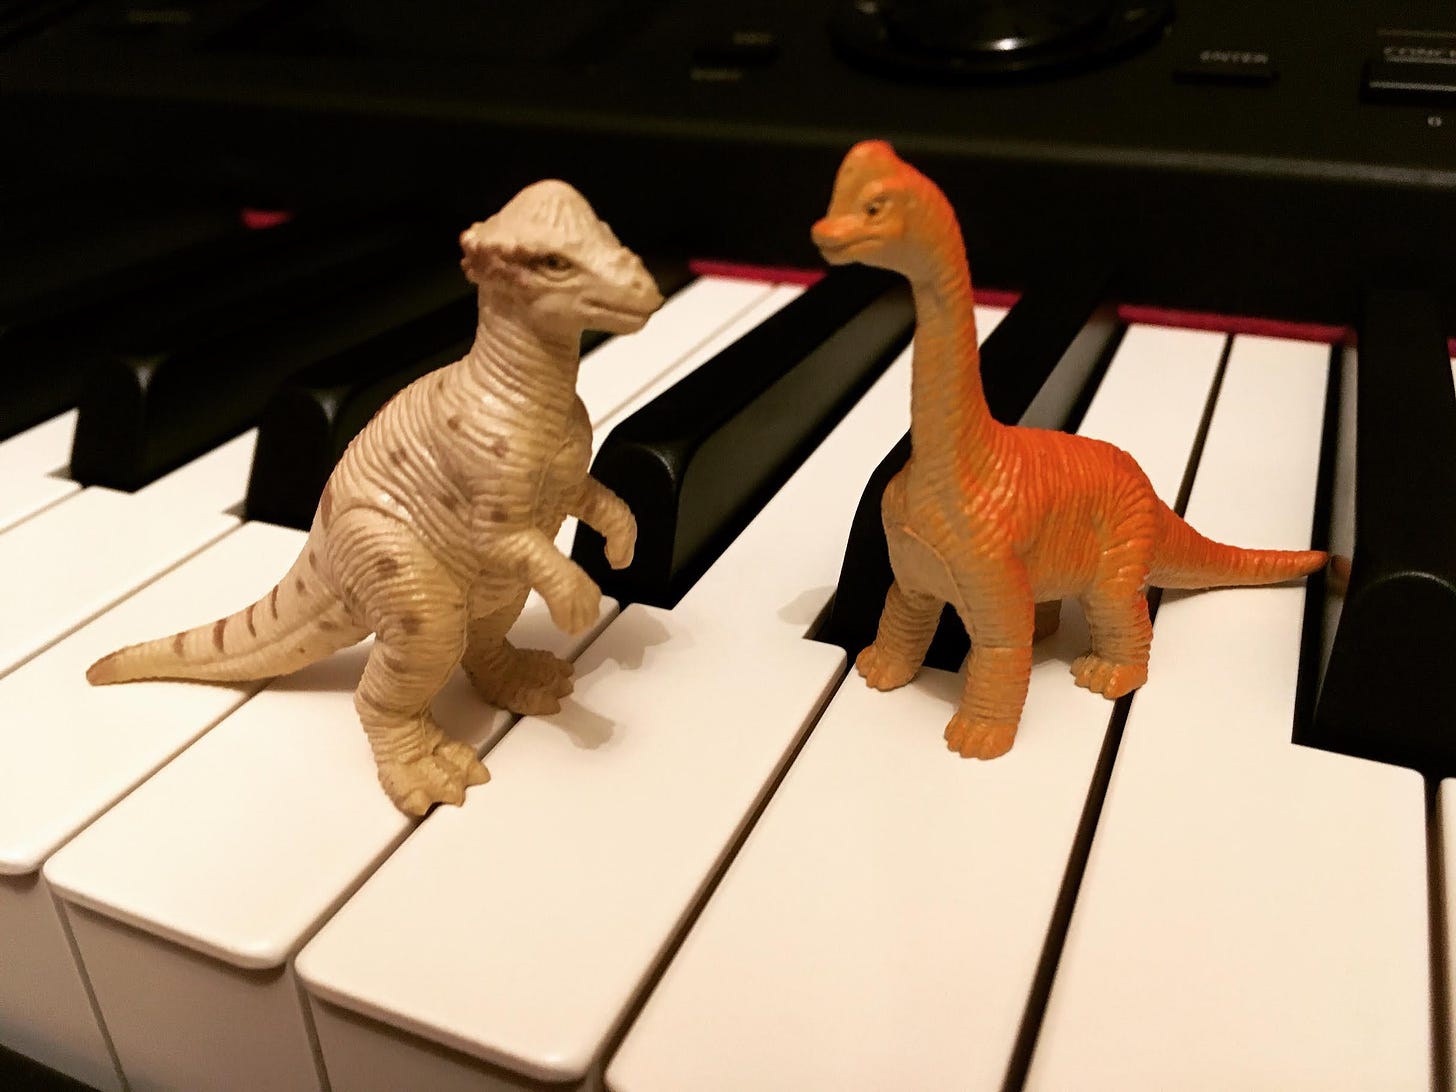 A very small brachiosaurus and an equally sized pachycephalosaurus standing on a piano keyboard.